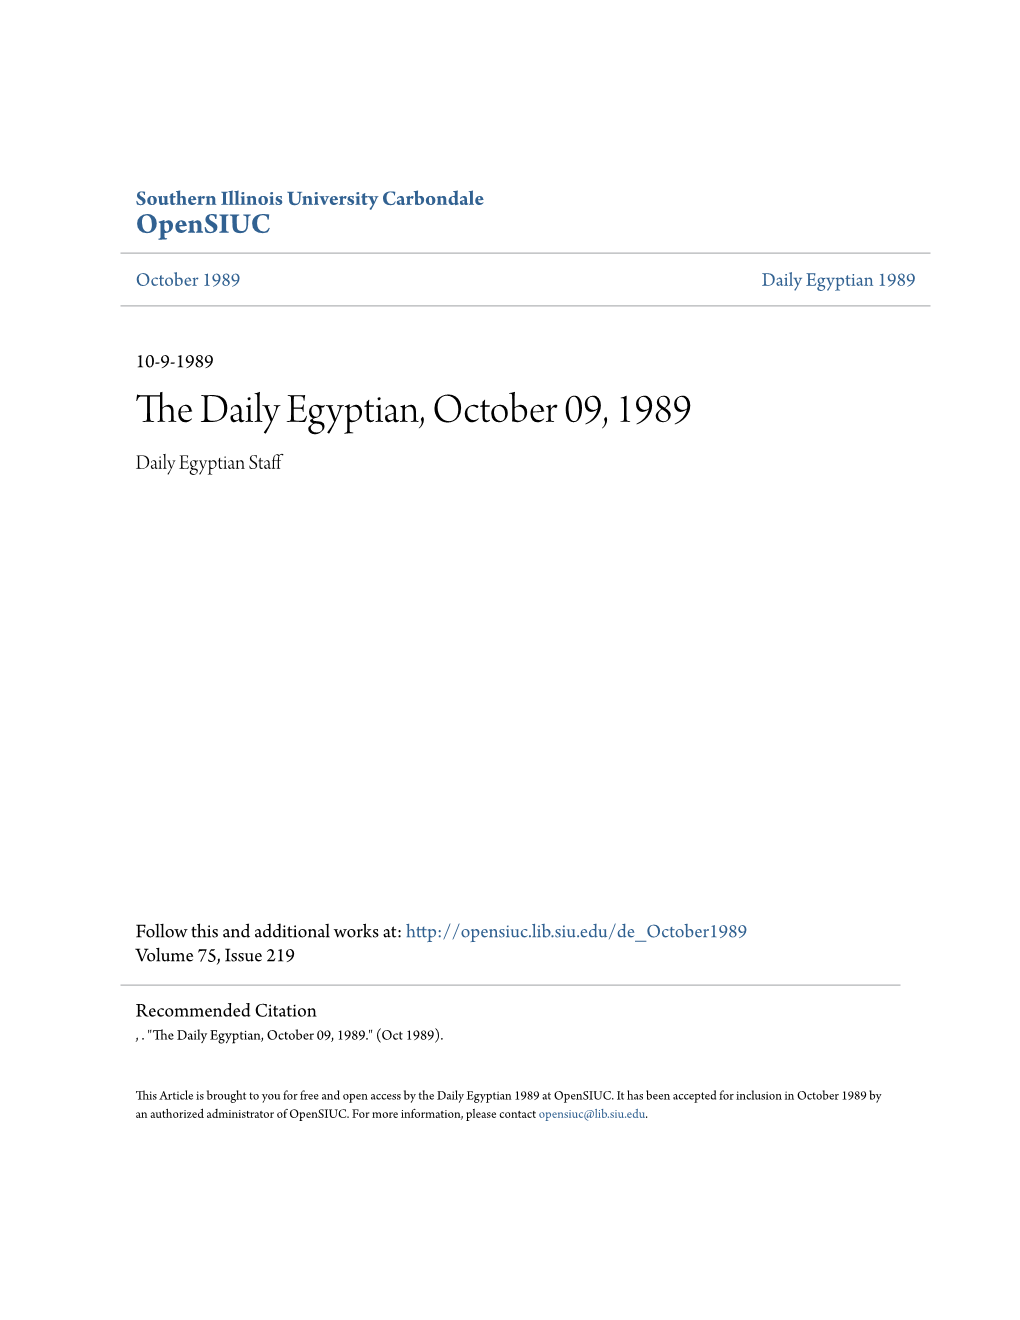 The Daily Egyptian, October 09, 1989